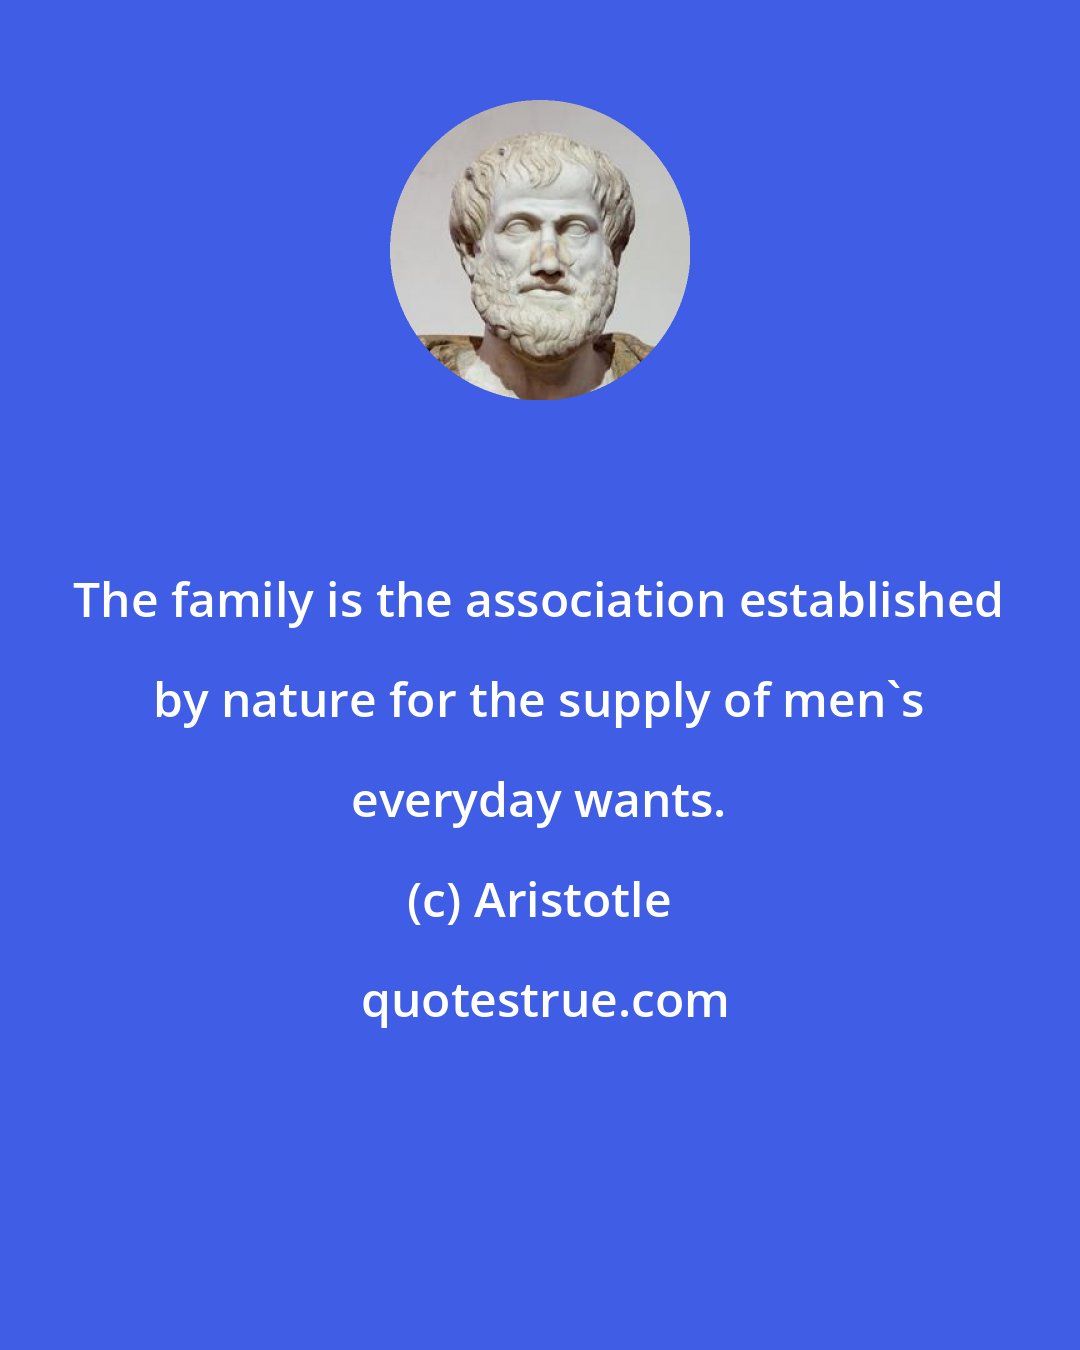 Aristotle: The family is the association established by nature for the supply of men's everyday wants.